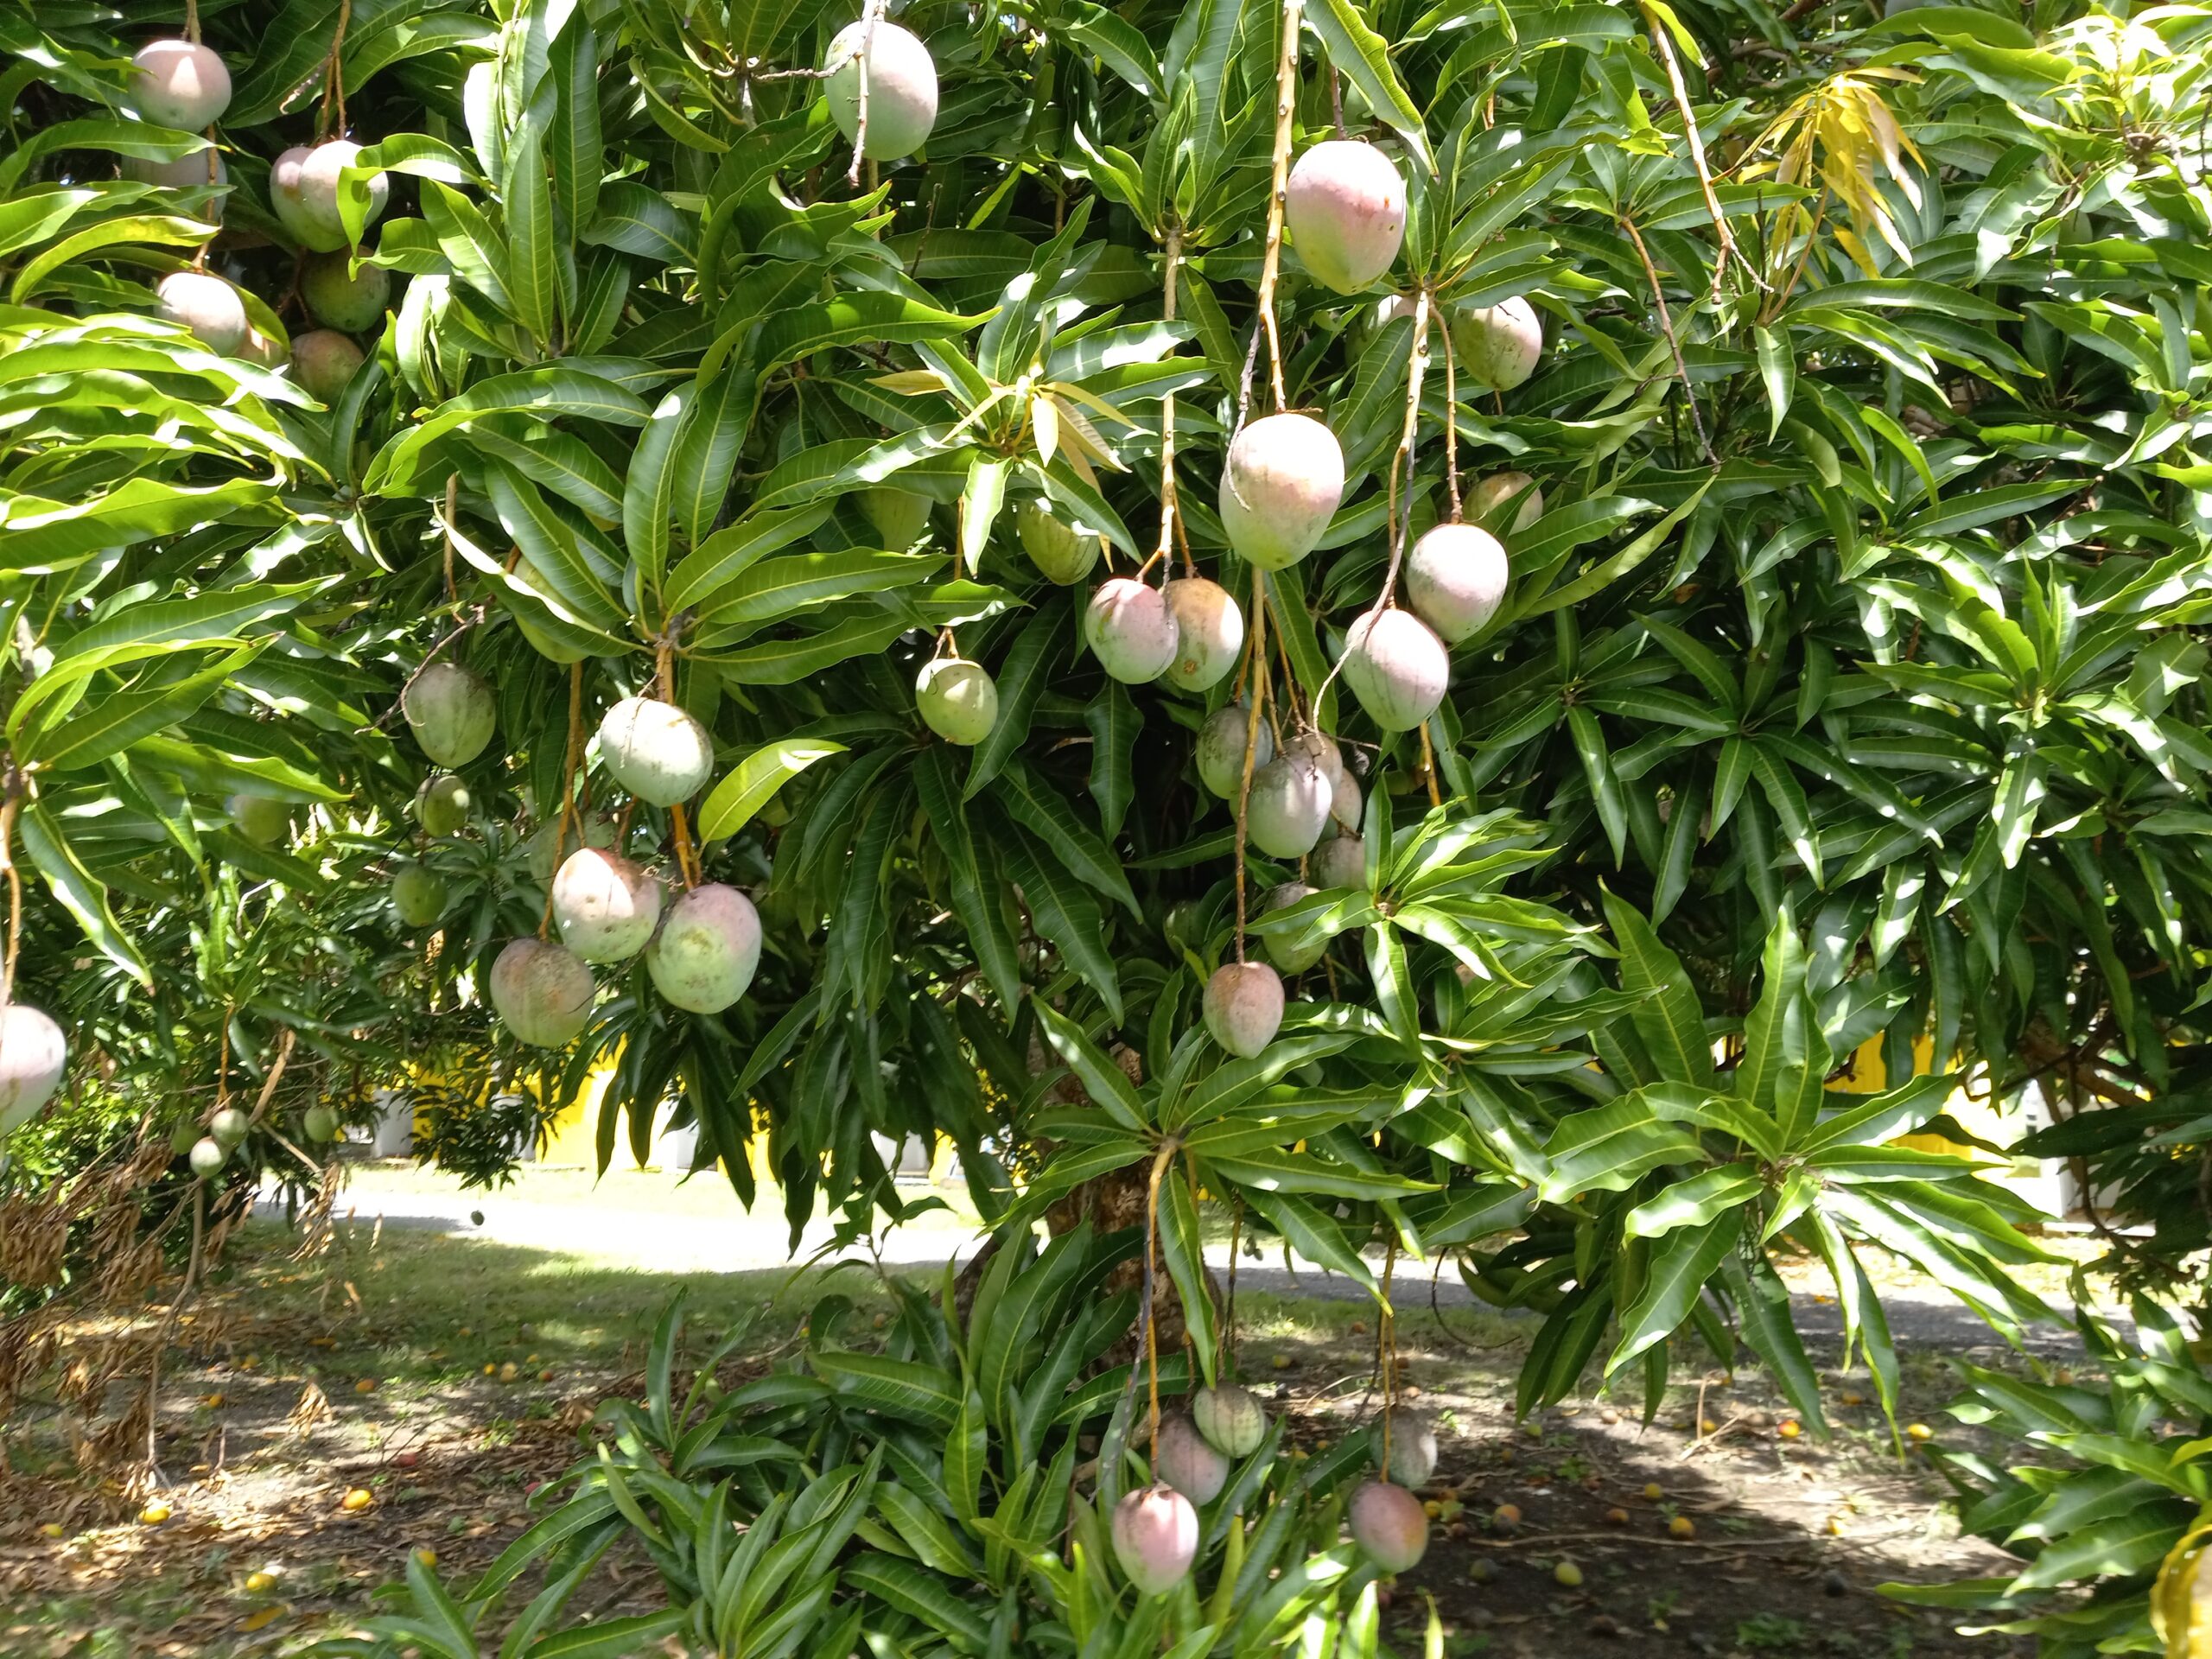 Mangoes are very prone to irregular or biannual bearing and this habit varies between varieties. Although no cause or solution has yet been found for this, climatic conditions have considerable effect on mangoes fruiting. This one of the few varieties that produce this year at Lower Love orchard on the grounds of the department of agriculture on St. Croix. (Photo by Olasee Davis)